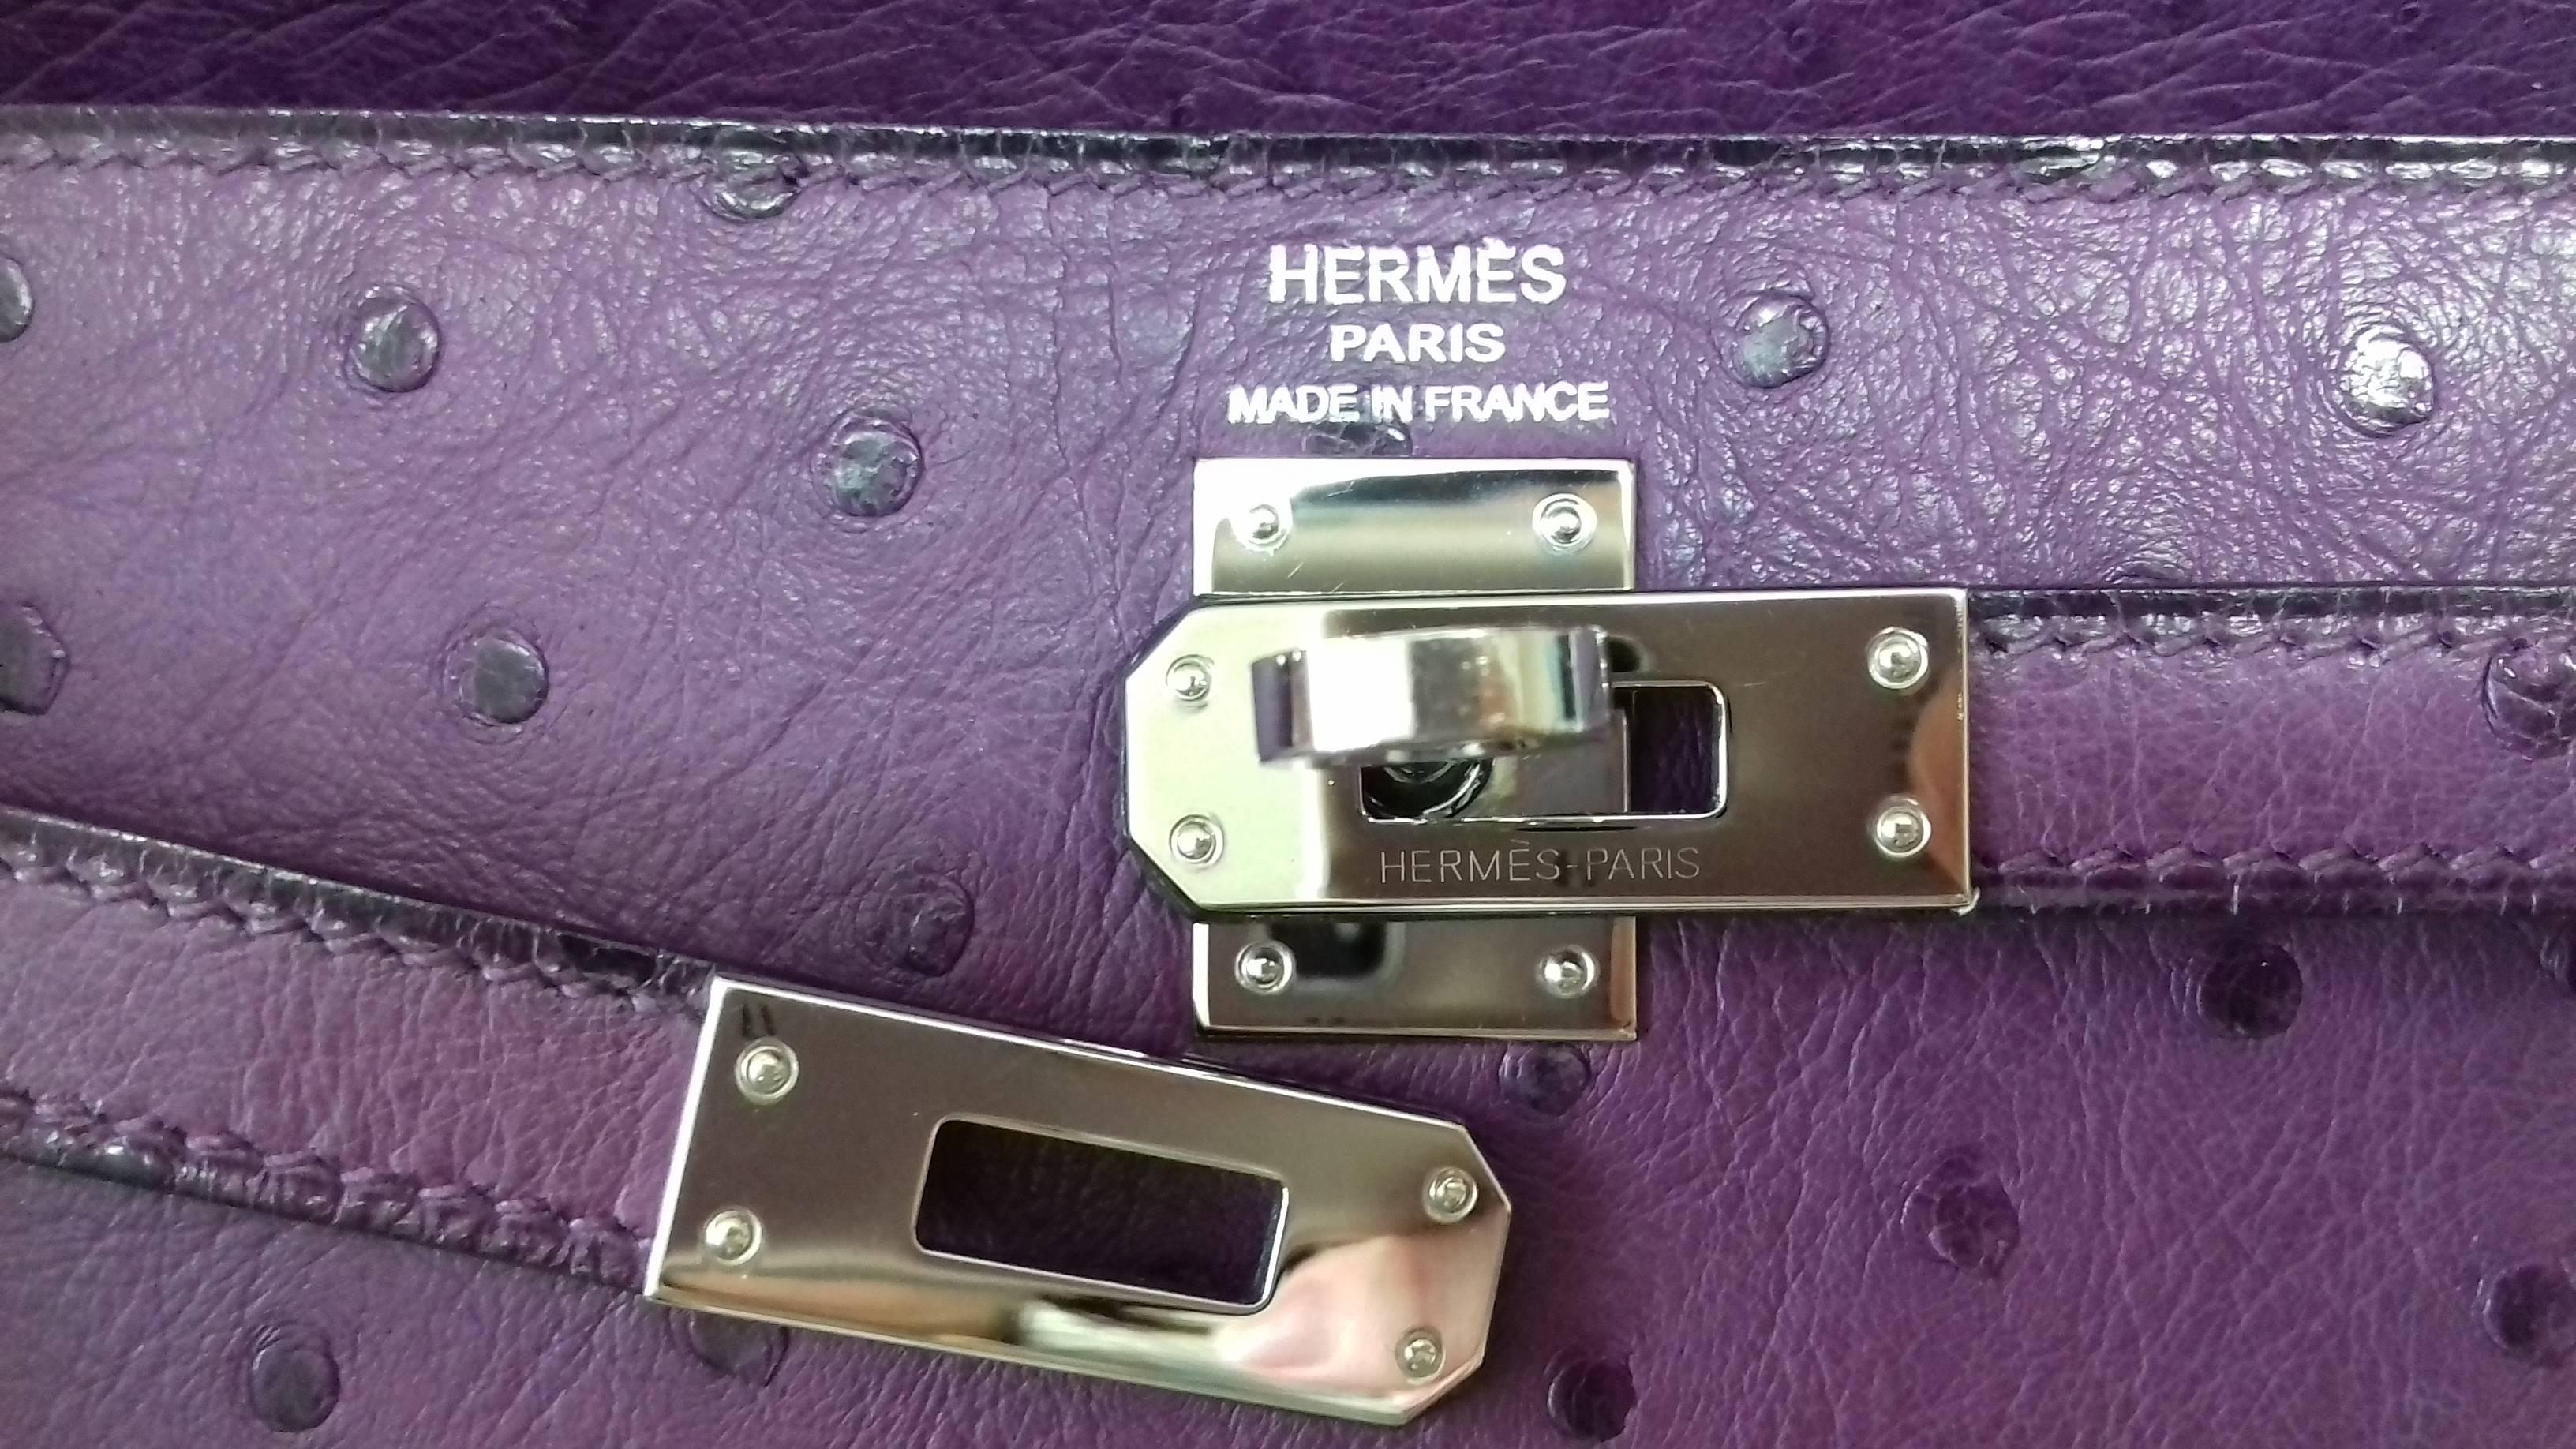 Please notice: the exact color is very difficult to show correctly on the photos. Thank you to check on the web what is the true color for "hermès violine" it's an aubergine purple 

Beautiful Authentic Hermes